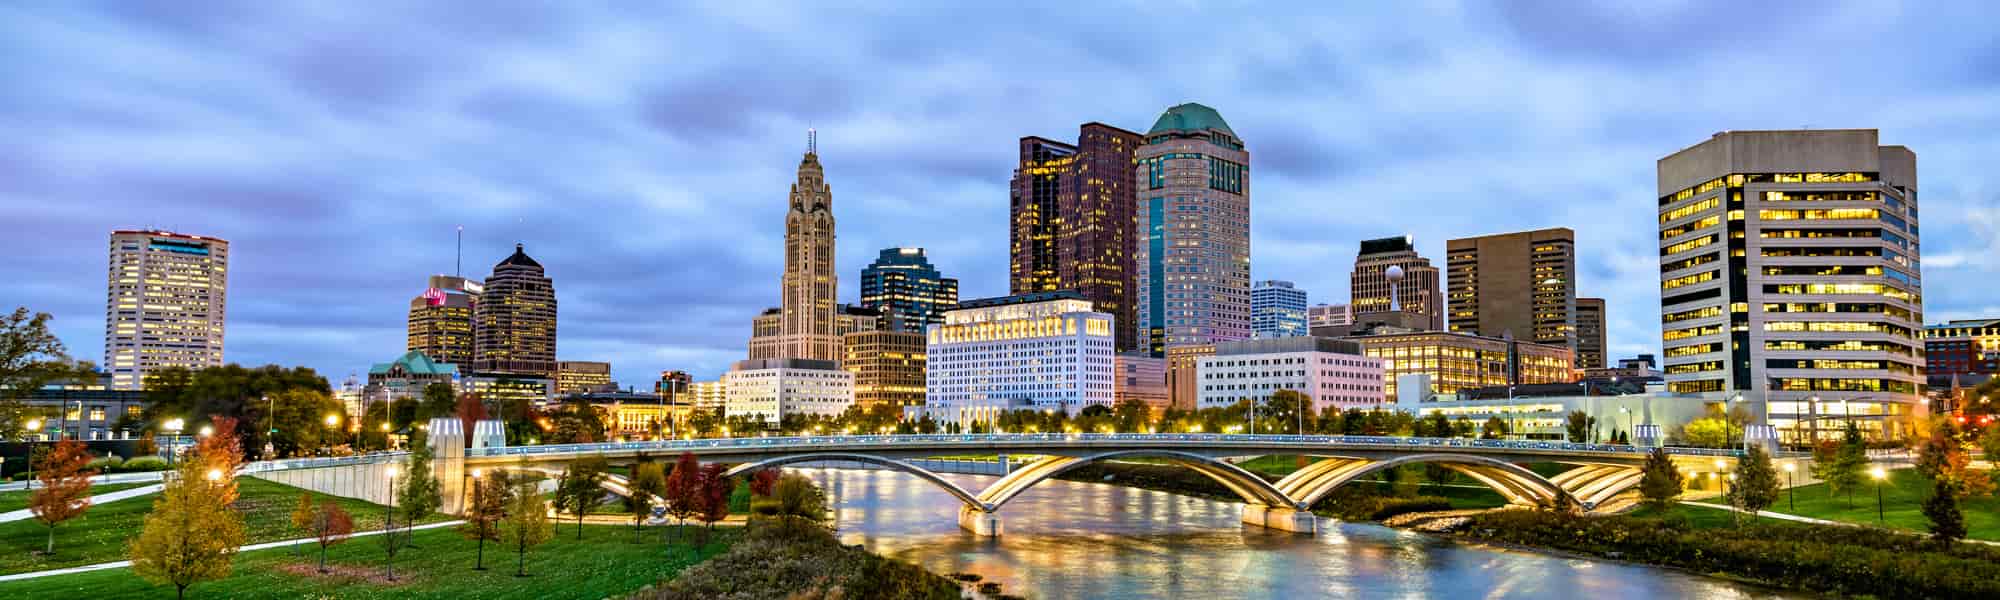 10 Cheapest Places & Cities To Live In The U.S. - BTN Realty